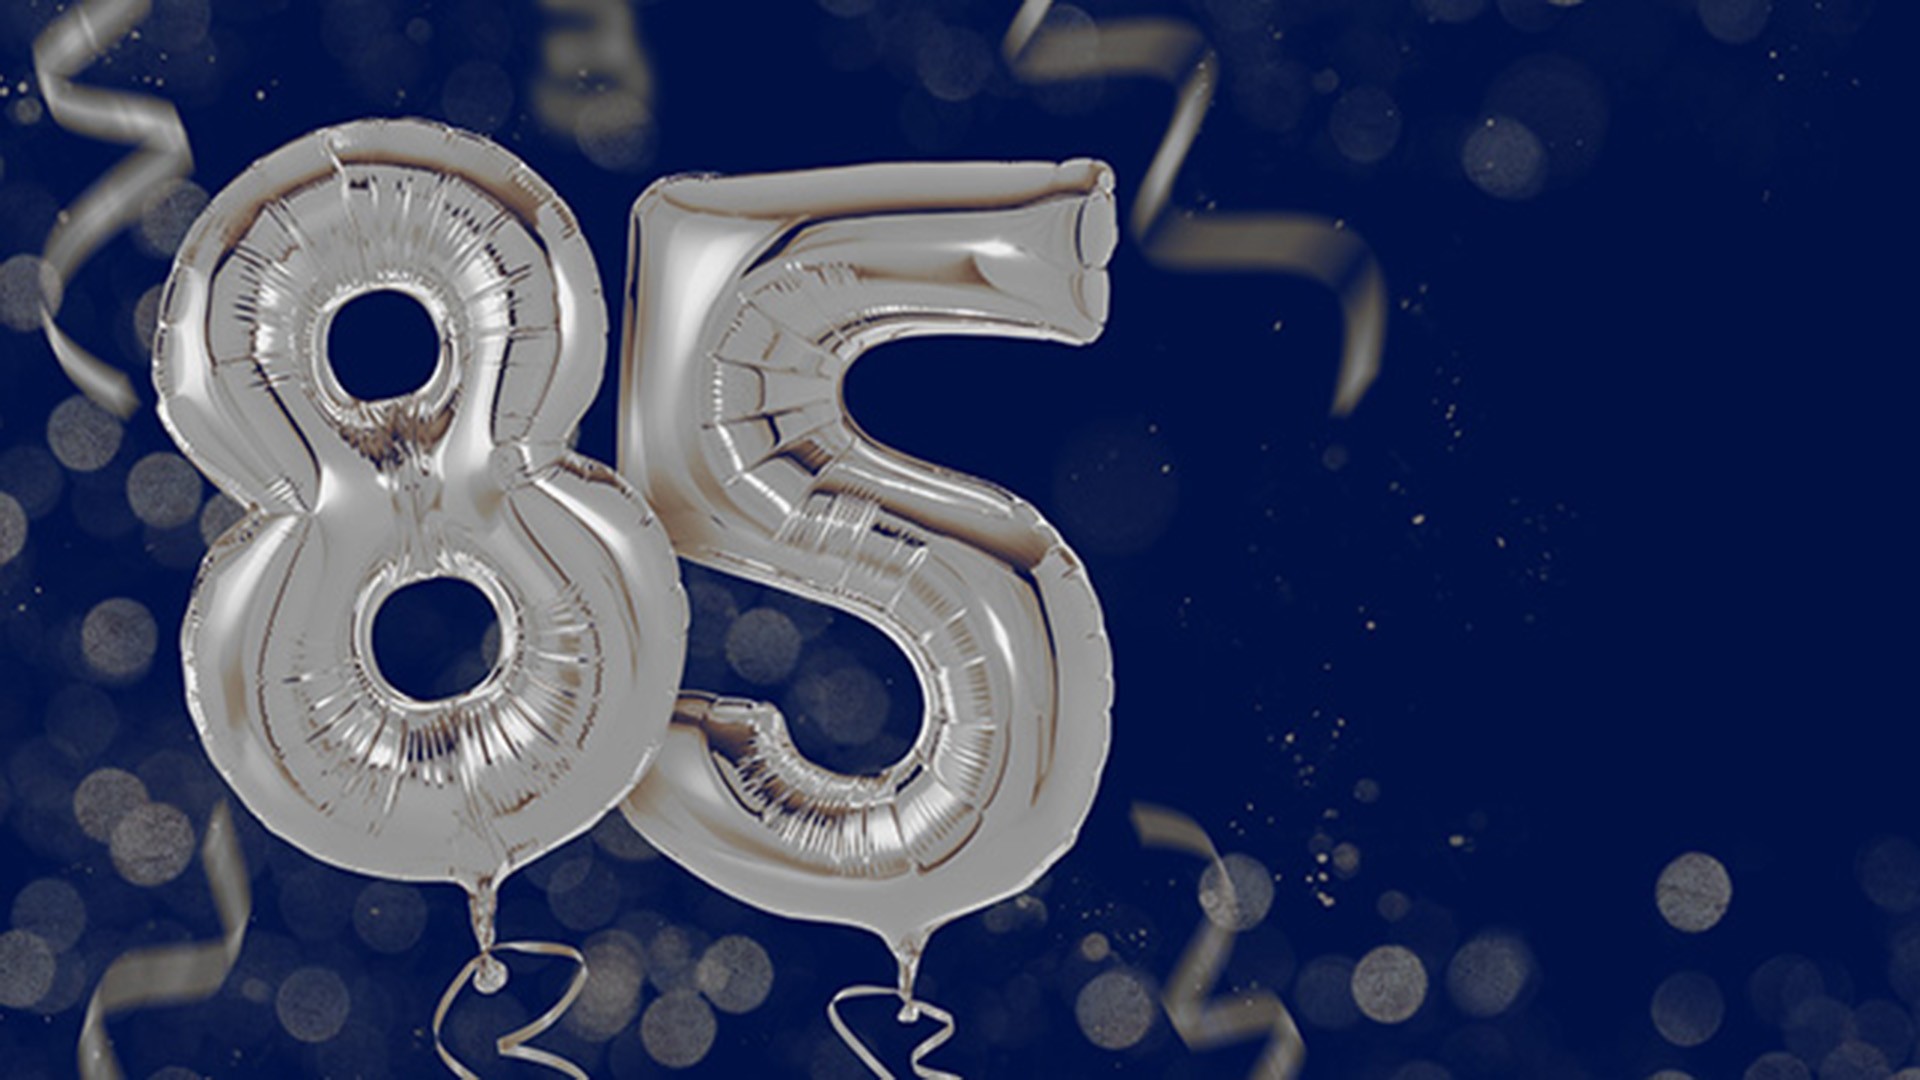 dark blue background with silver party balloons that form the number 85